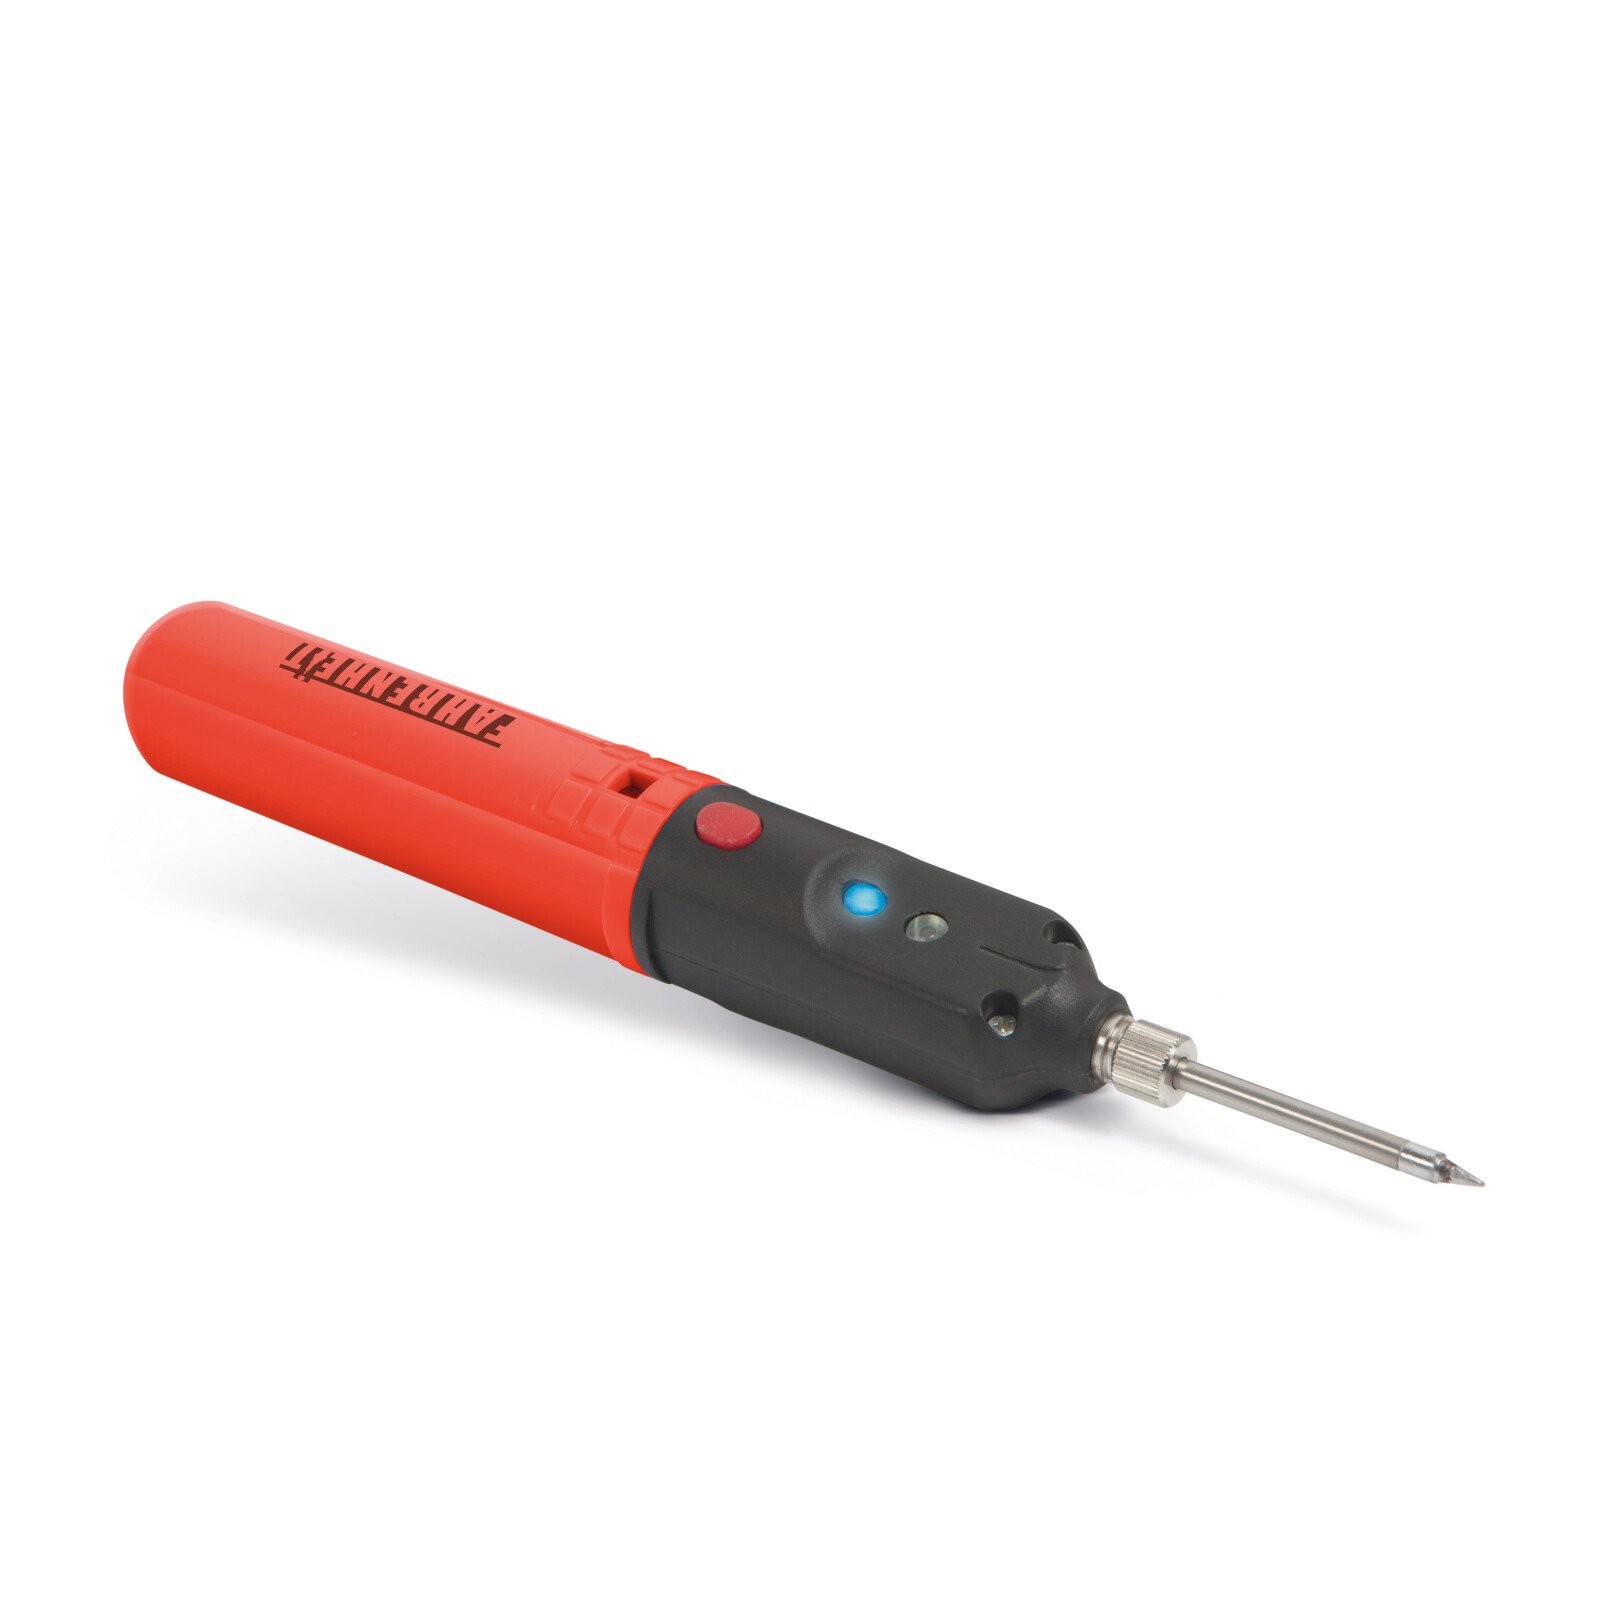 Cordless soldering iron station - with wireless charging, with cleaning sponge thumb